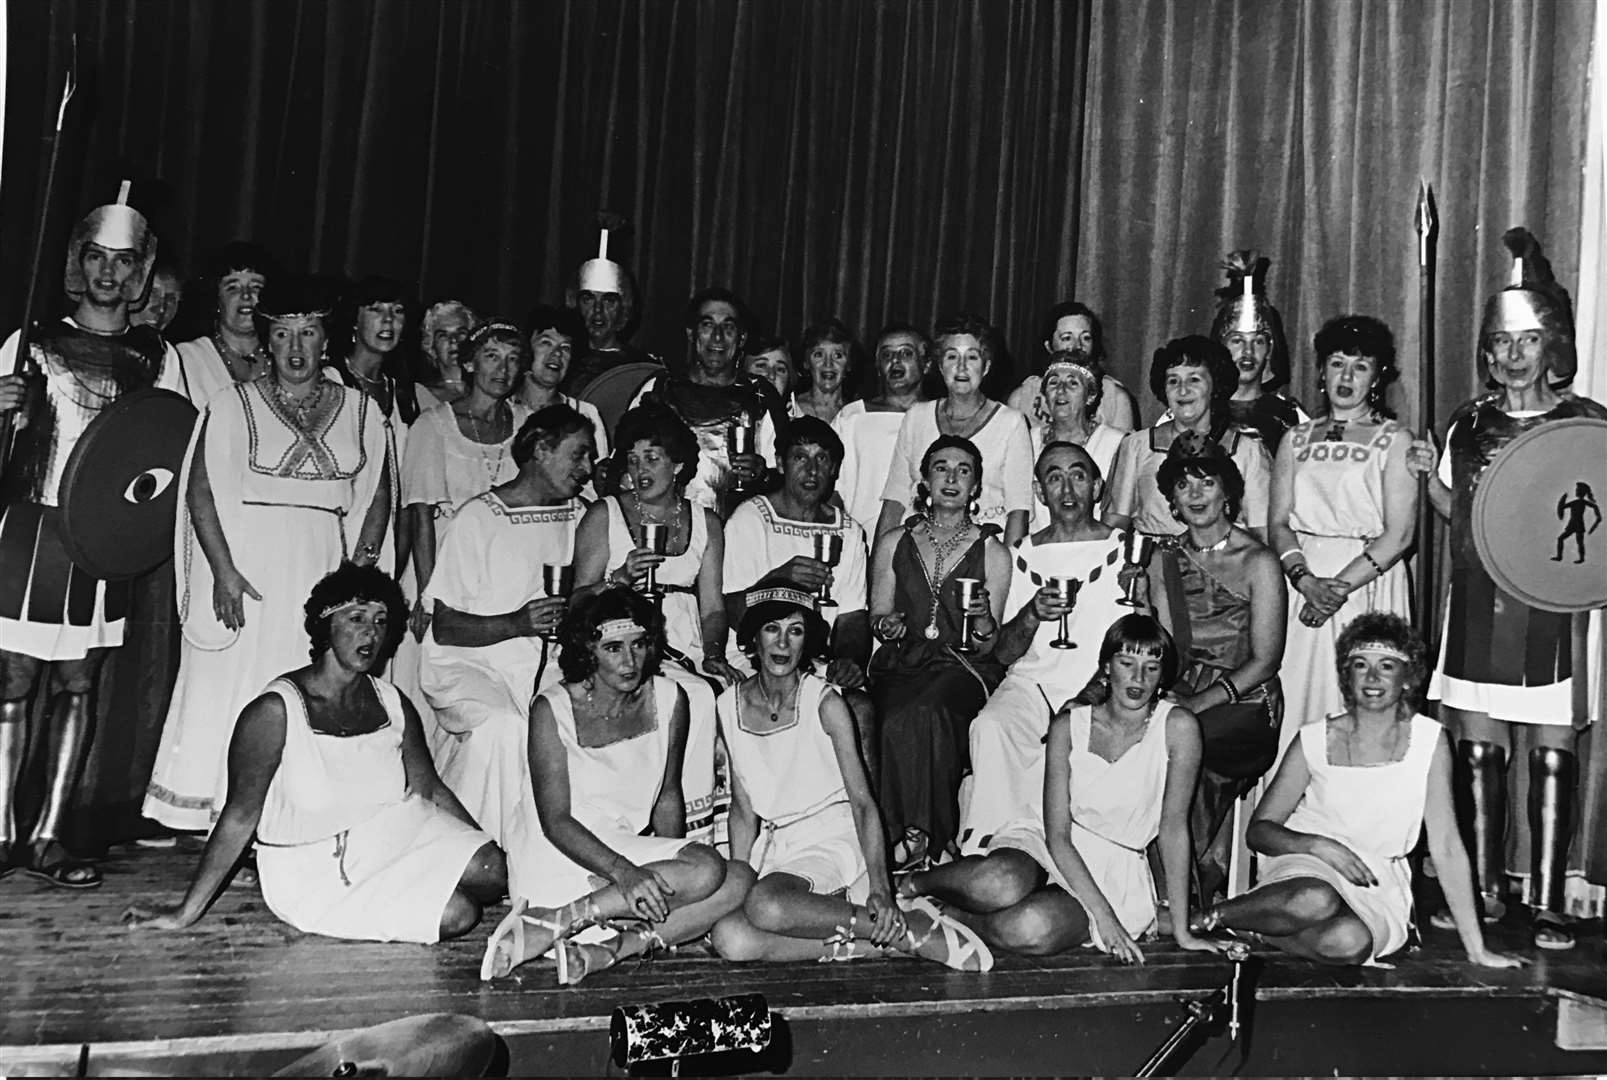 Sheppey singers pictured in 1982